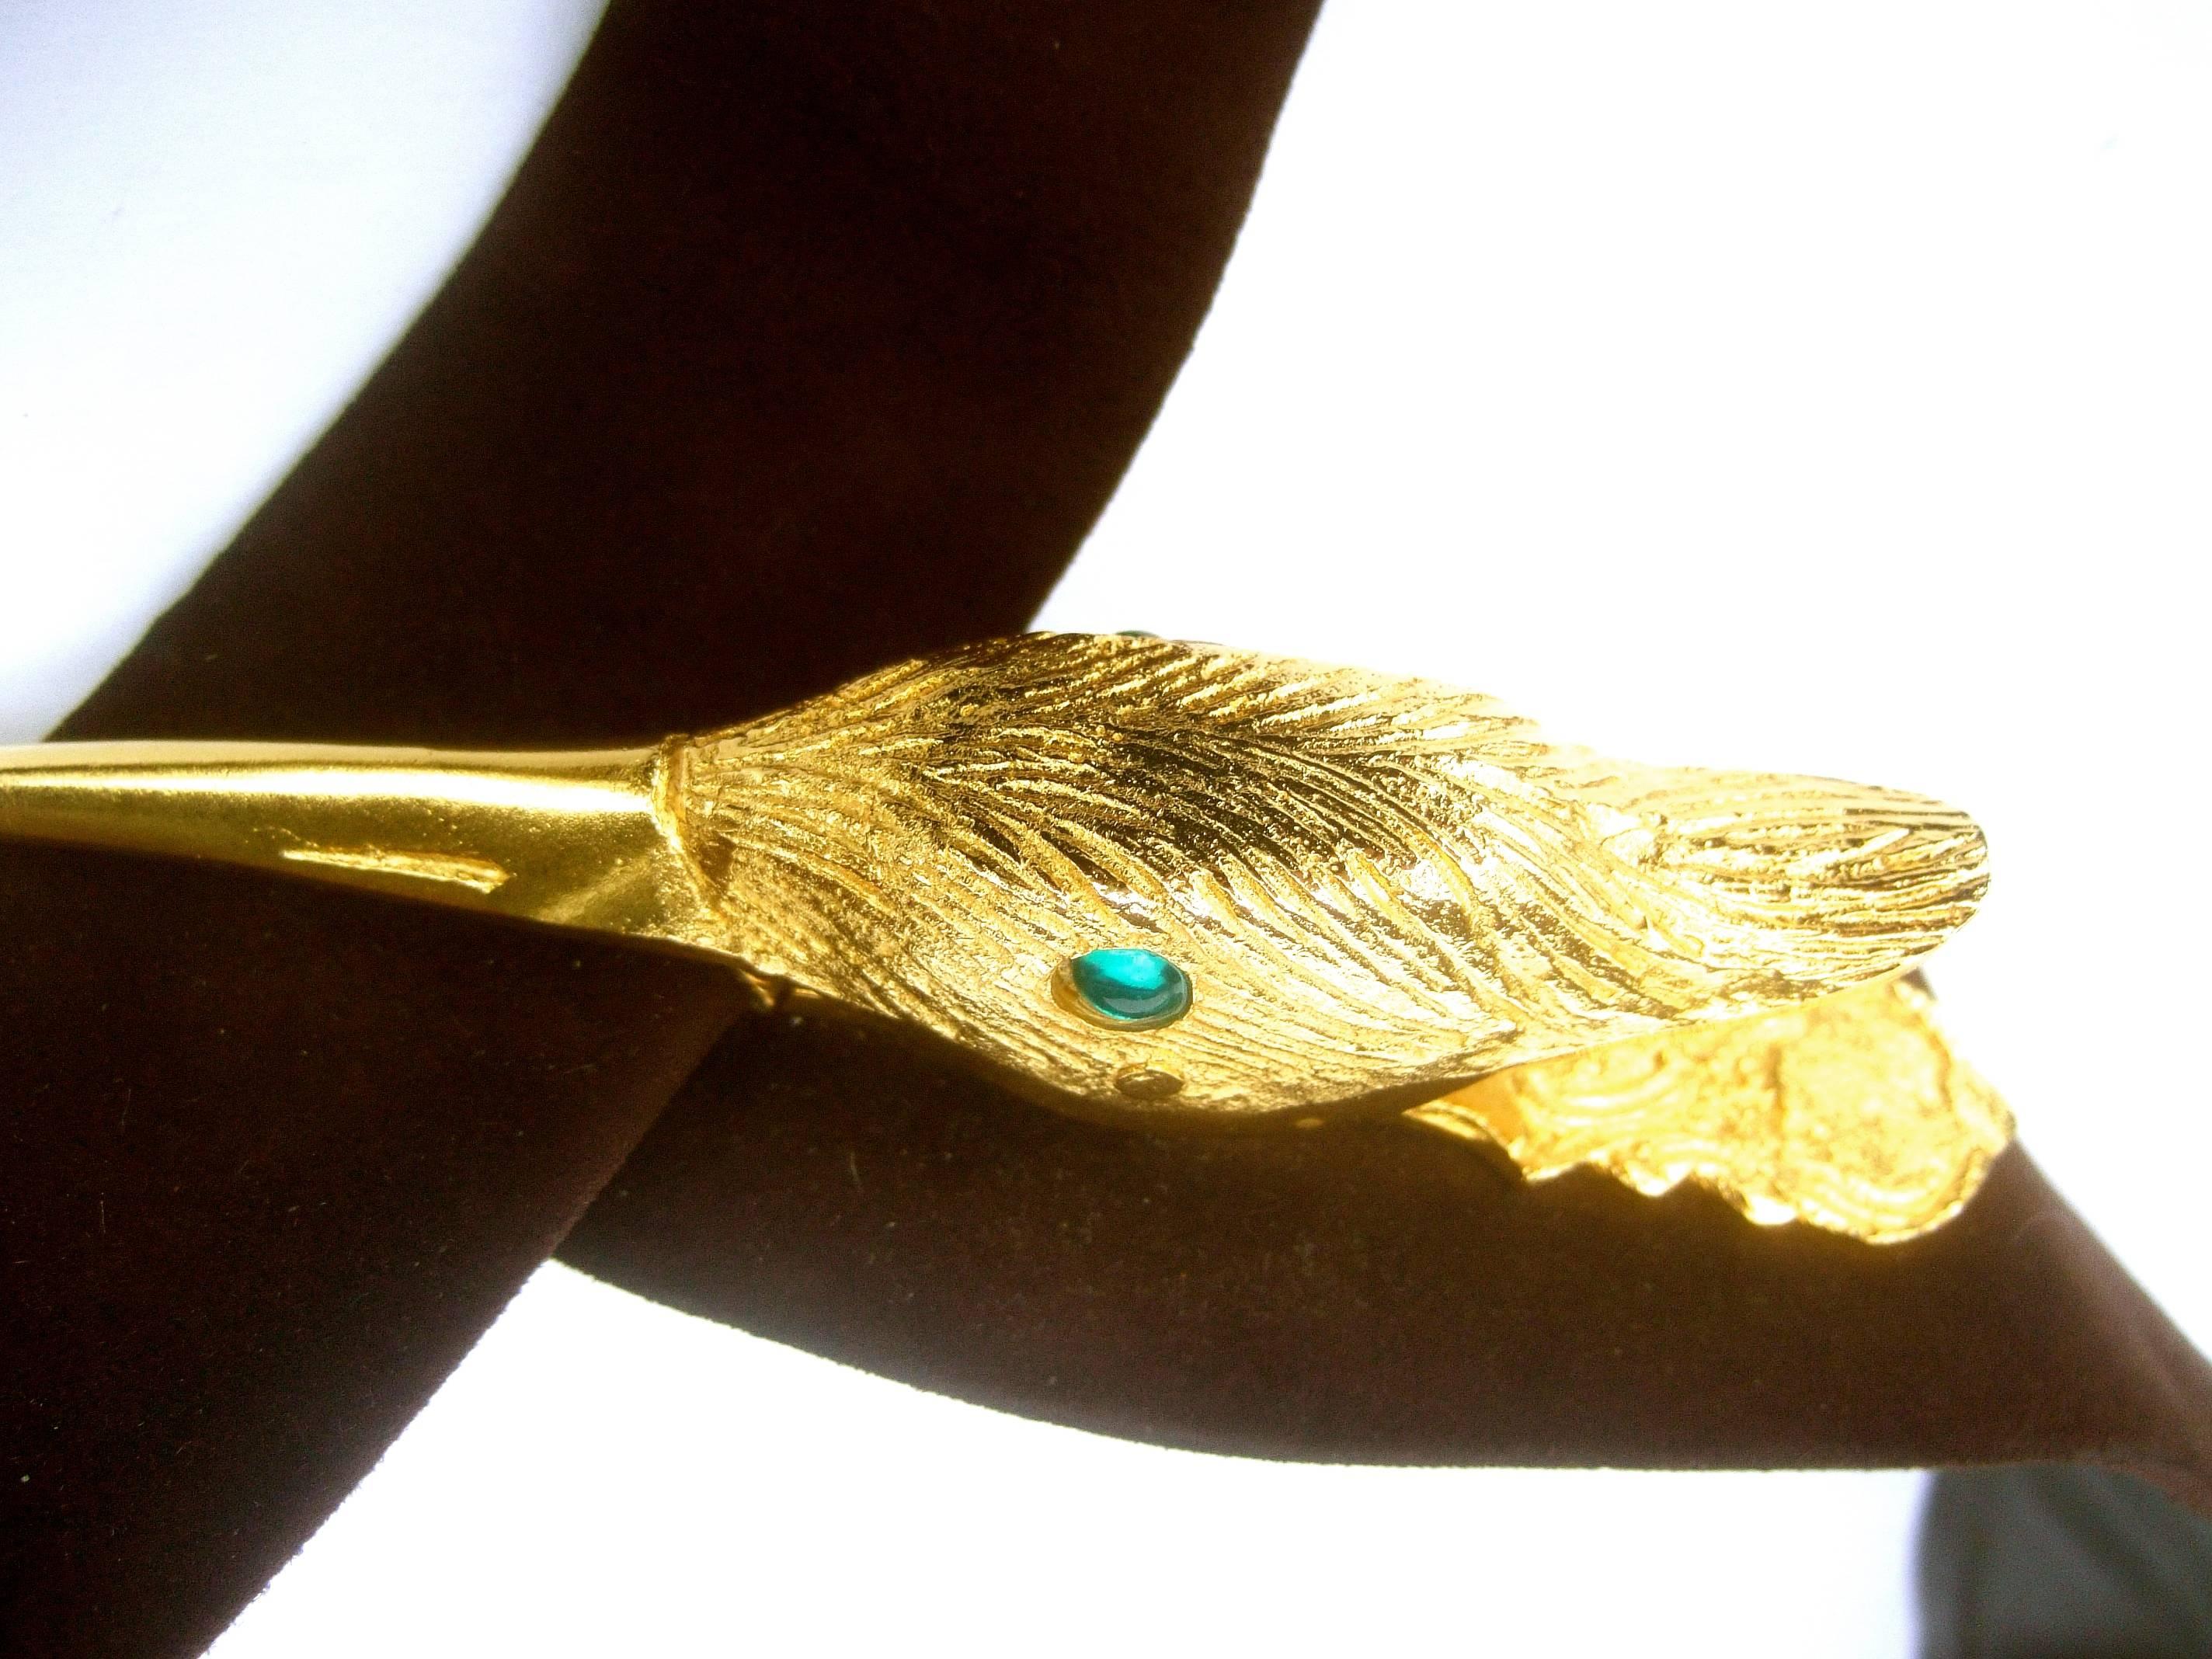 Judith Leiber exotic gilt metal bird buckle belt circa 1980s
The avant garde belt is designed with a stylized gilt metal
birds head that serves as the buckle 

The birds head has etched detail that emulates feathers
Embellished with a set of emerald